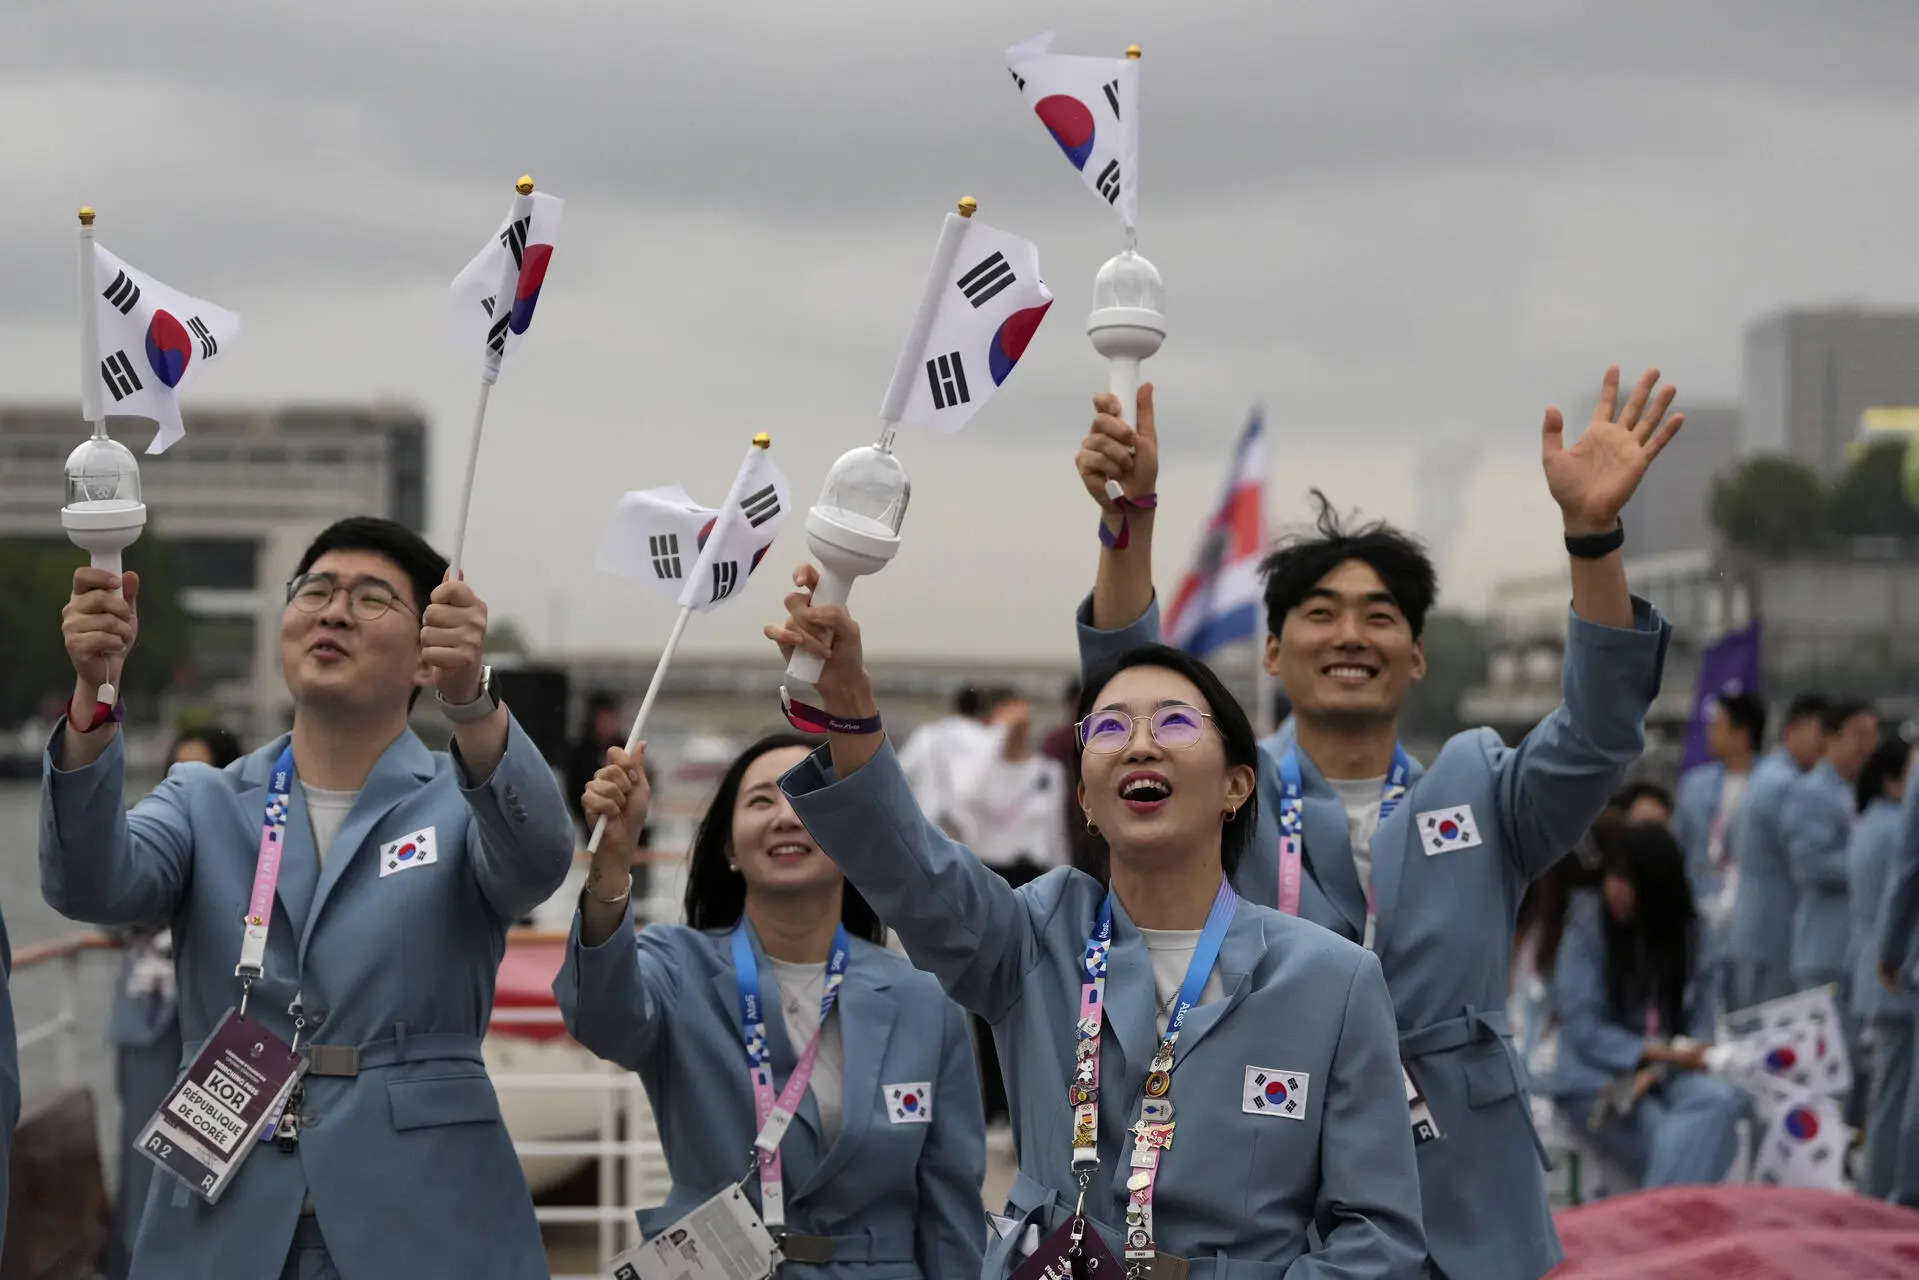 When South Korea was misidentified as North Korea at the Paris Olympics opening ceremony 